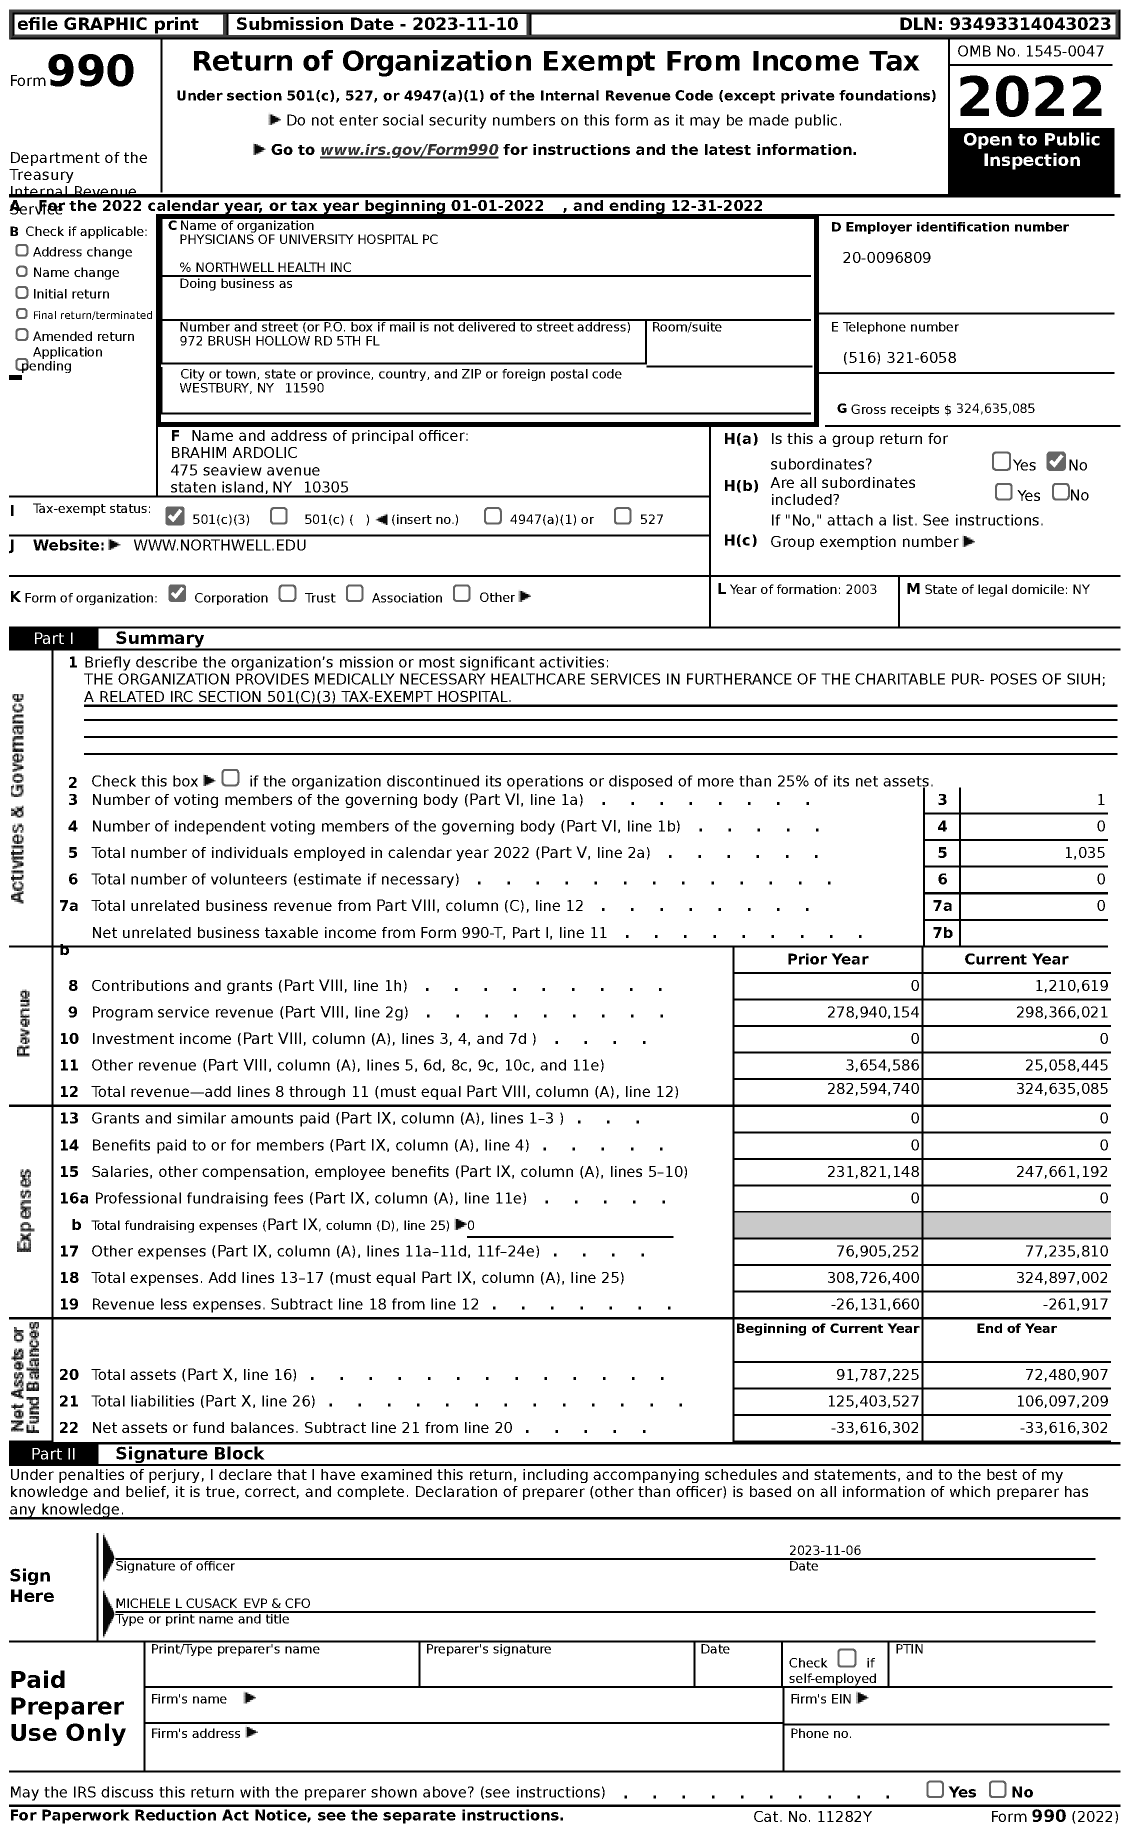 Image of first page of 2022 Form 990 for Physicians of University Hospital PC